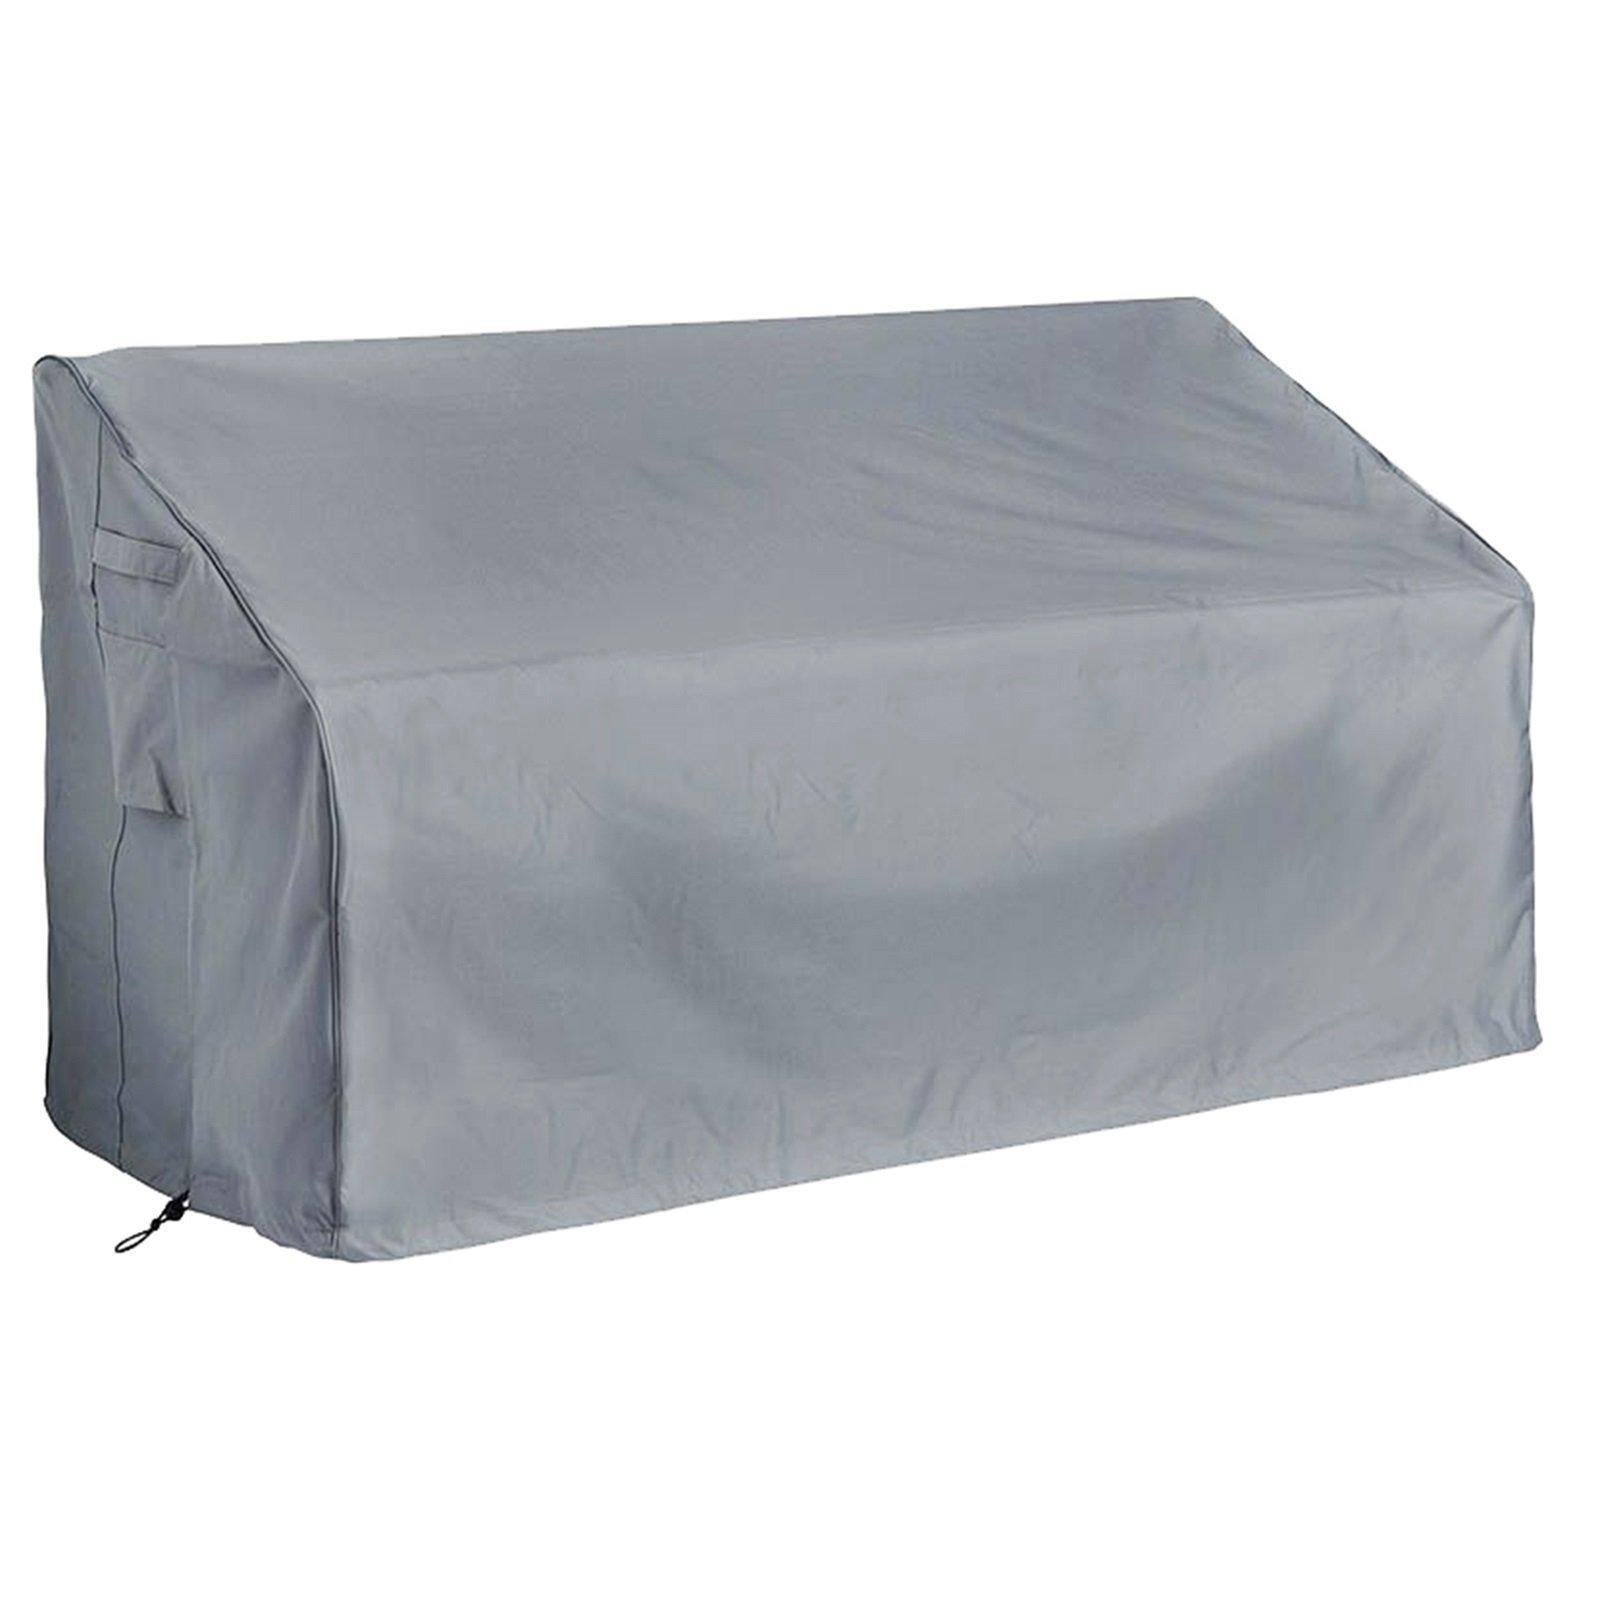 Garden Patio Waterproof 3 Seater Bench Seat Cover Protector - image 1